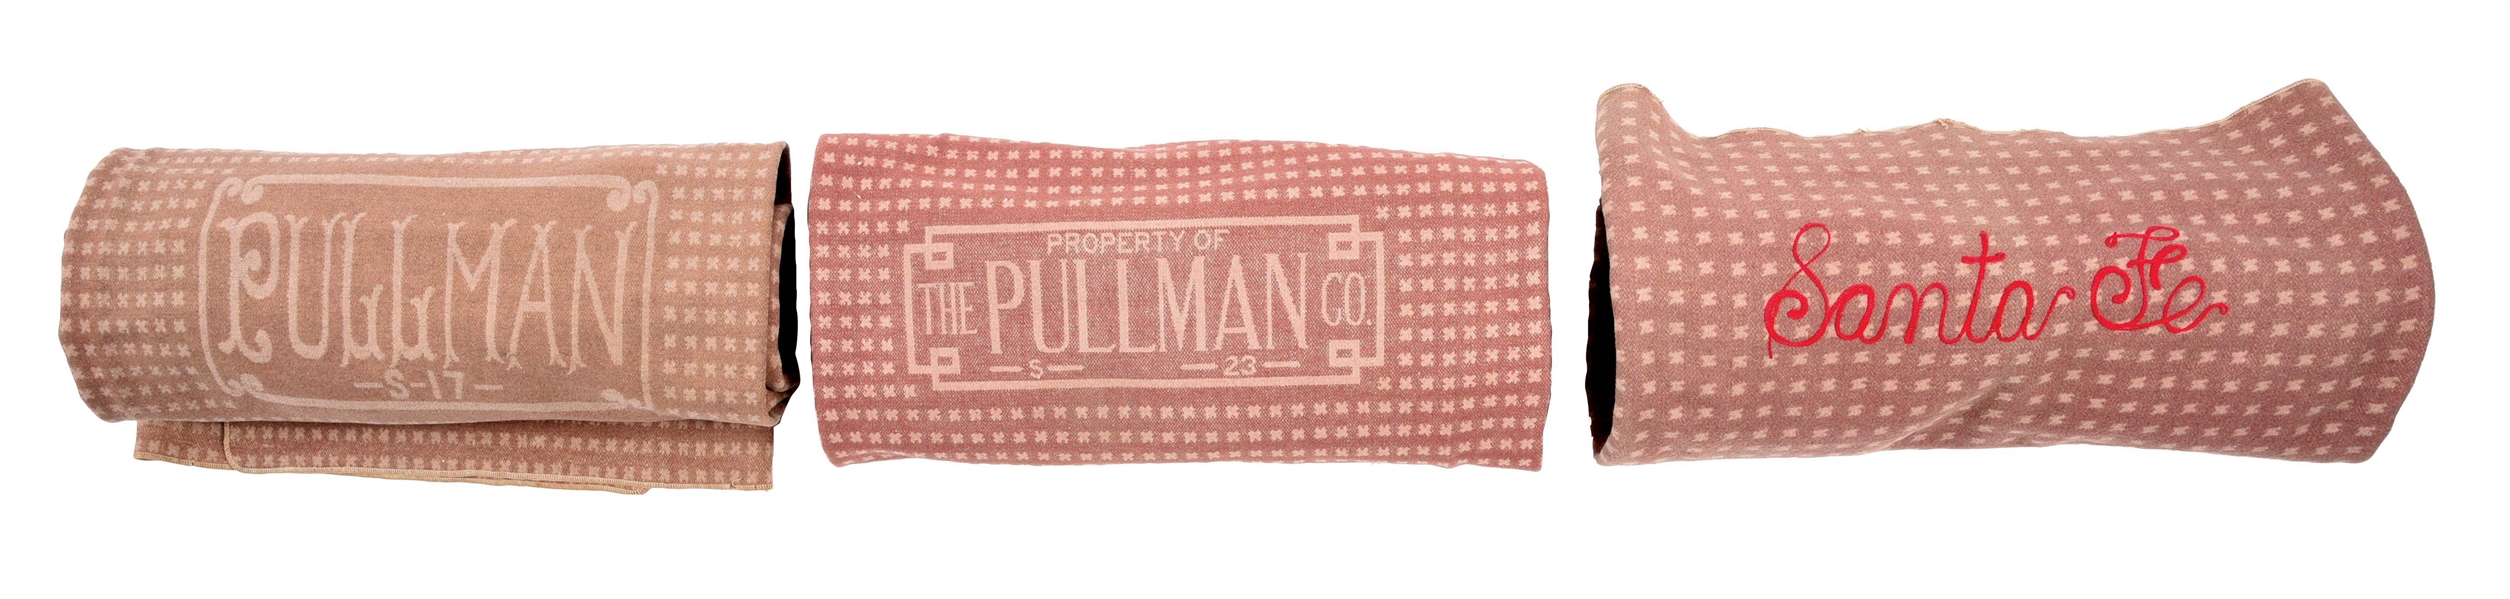 LOT OF 3: RAILROAD BLANKETS FOR SANTA FE AND PULLMAN. 